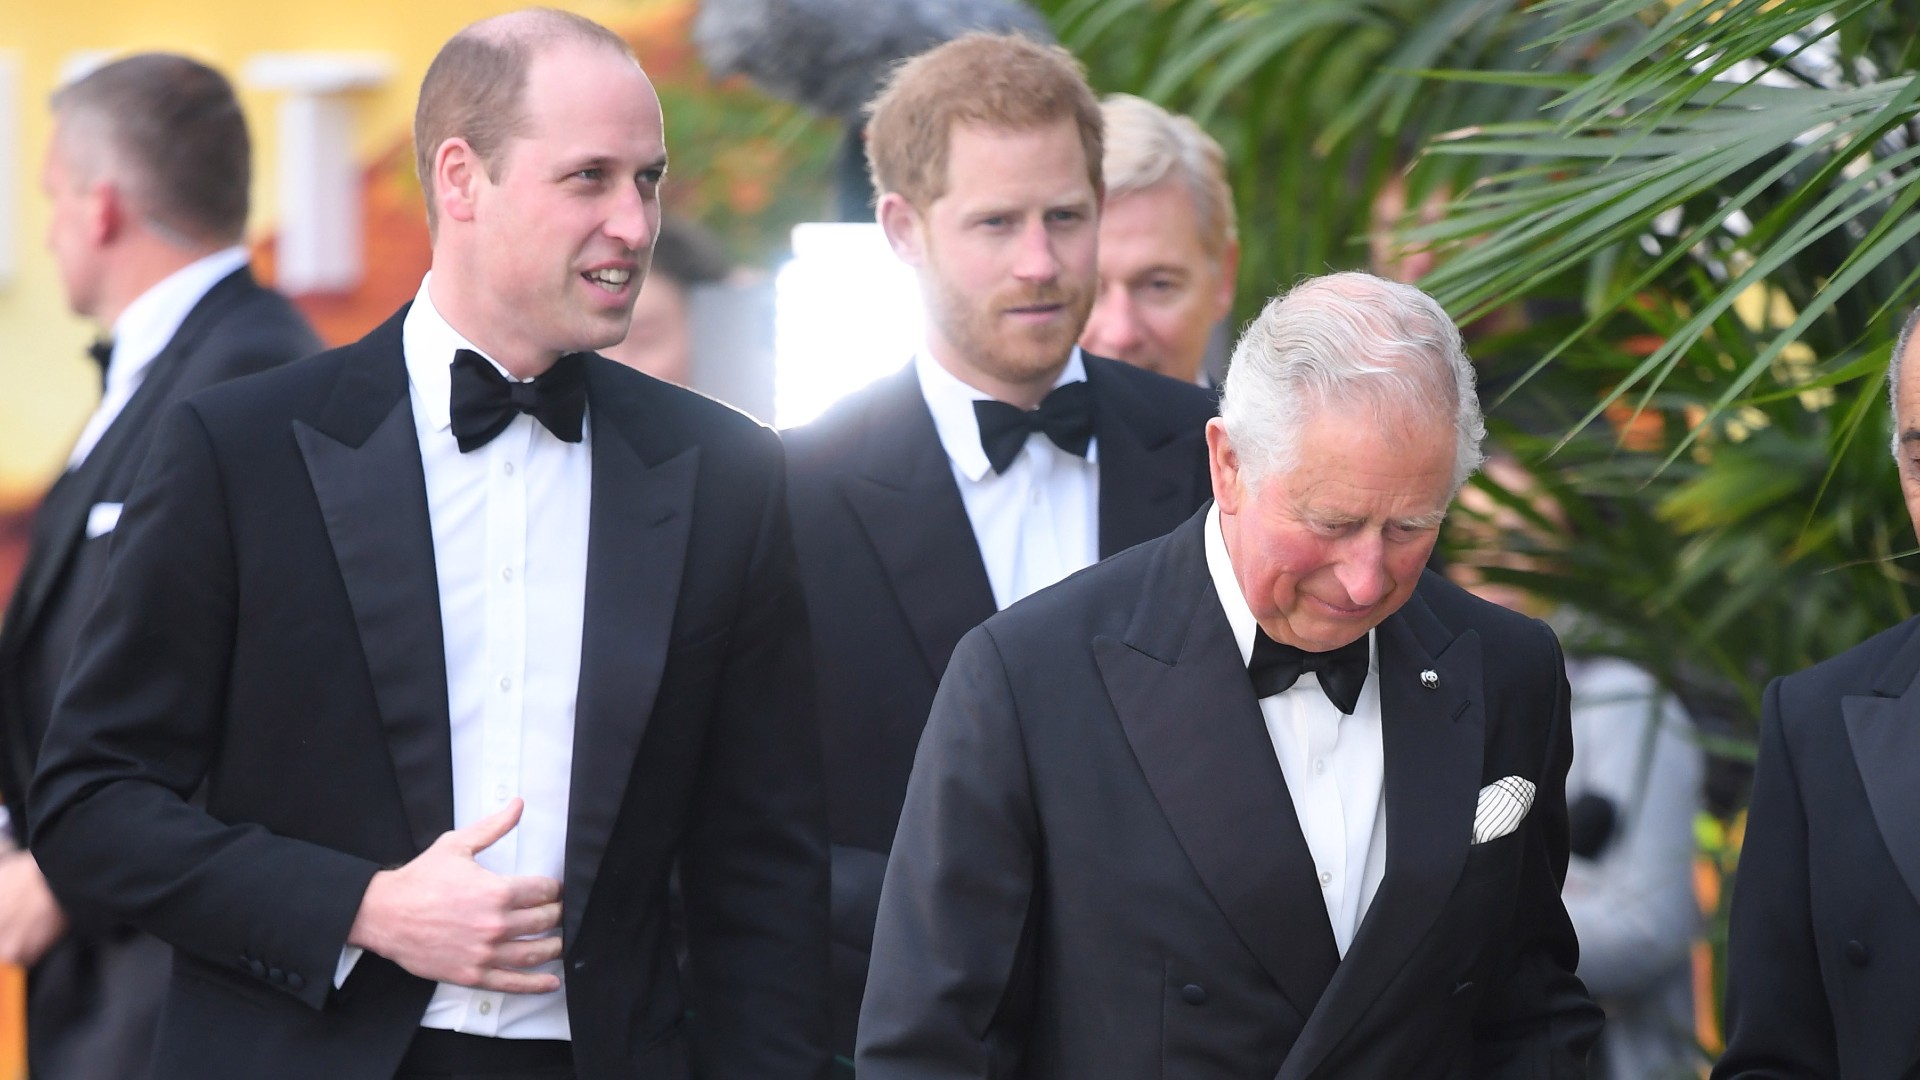 A Royal Reconciliation With Prince Harry Is "Almost Impossible," According to One Royal Expert